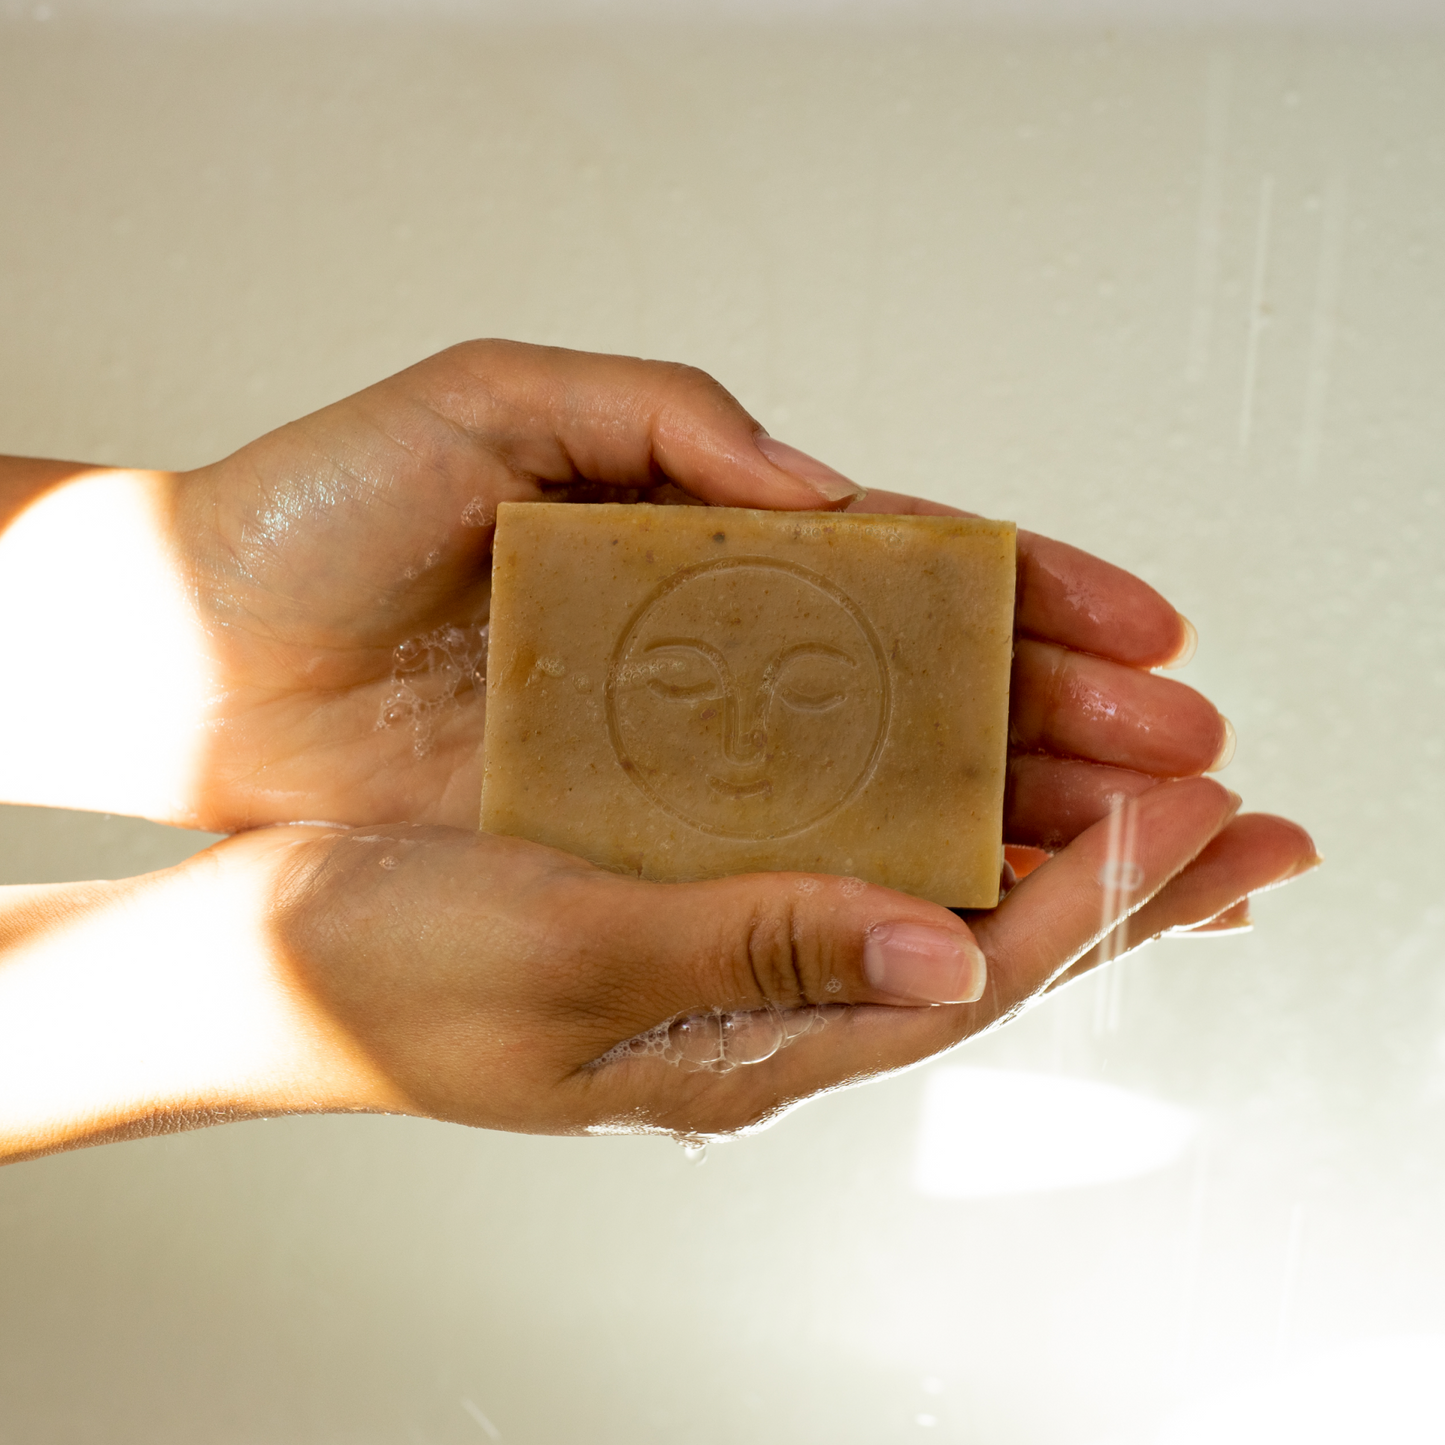 Moon Valley Organics Herbal Soap Bar Hands holding a lathered bar of soap under shower